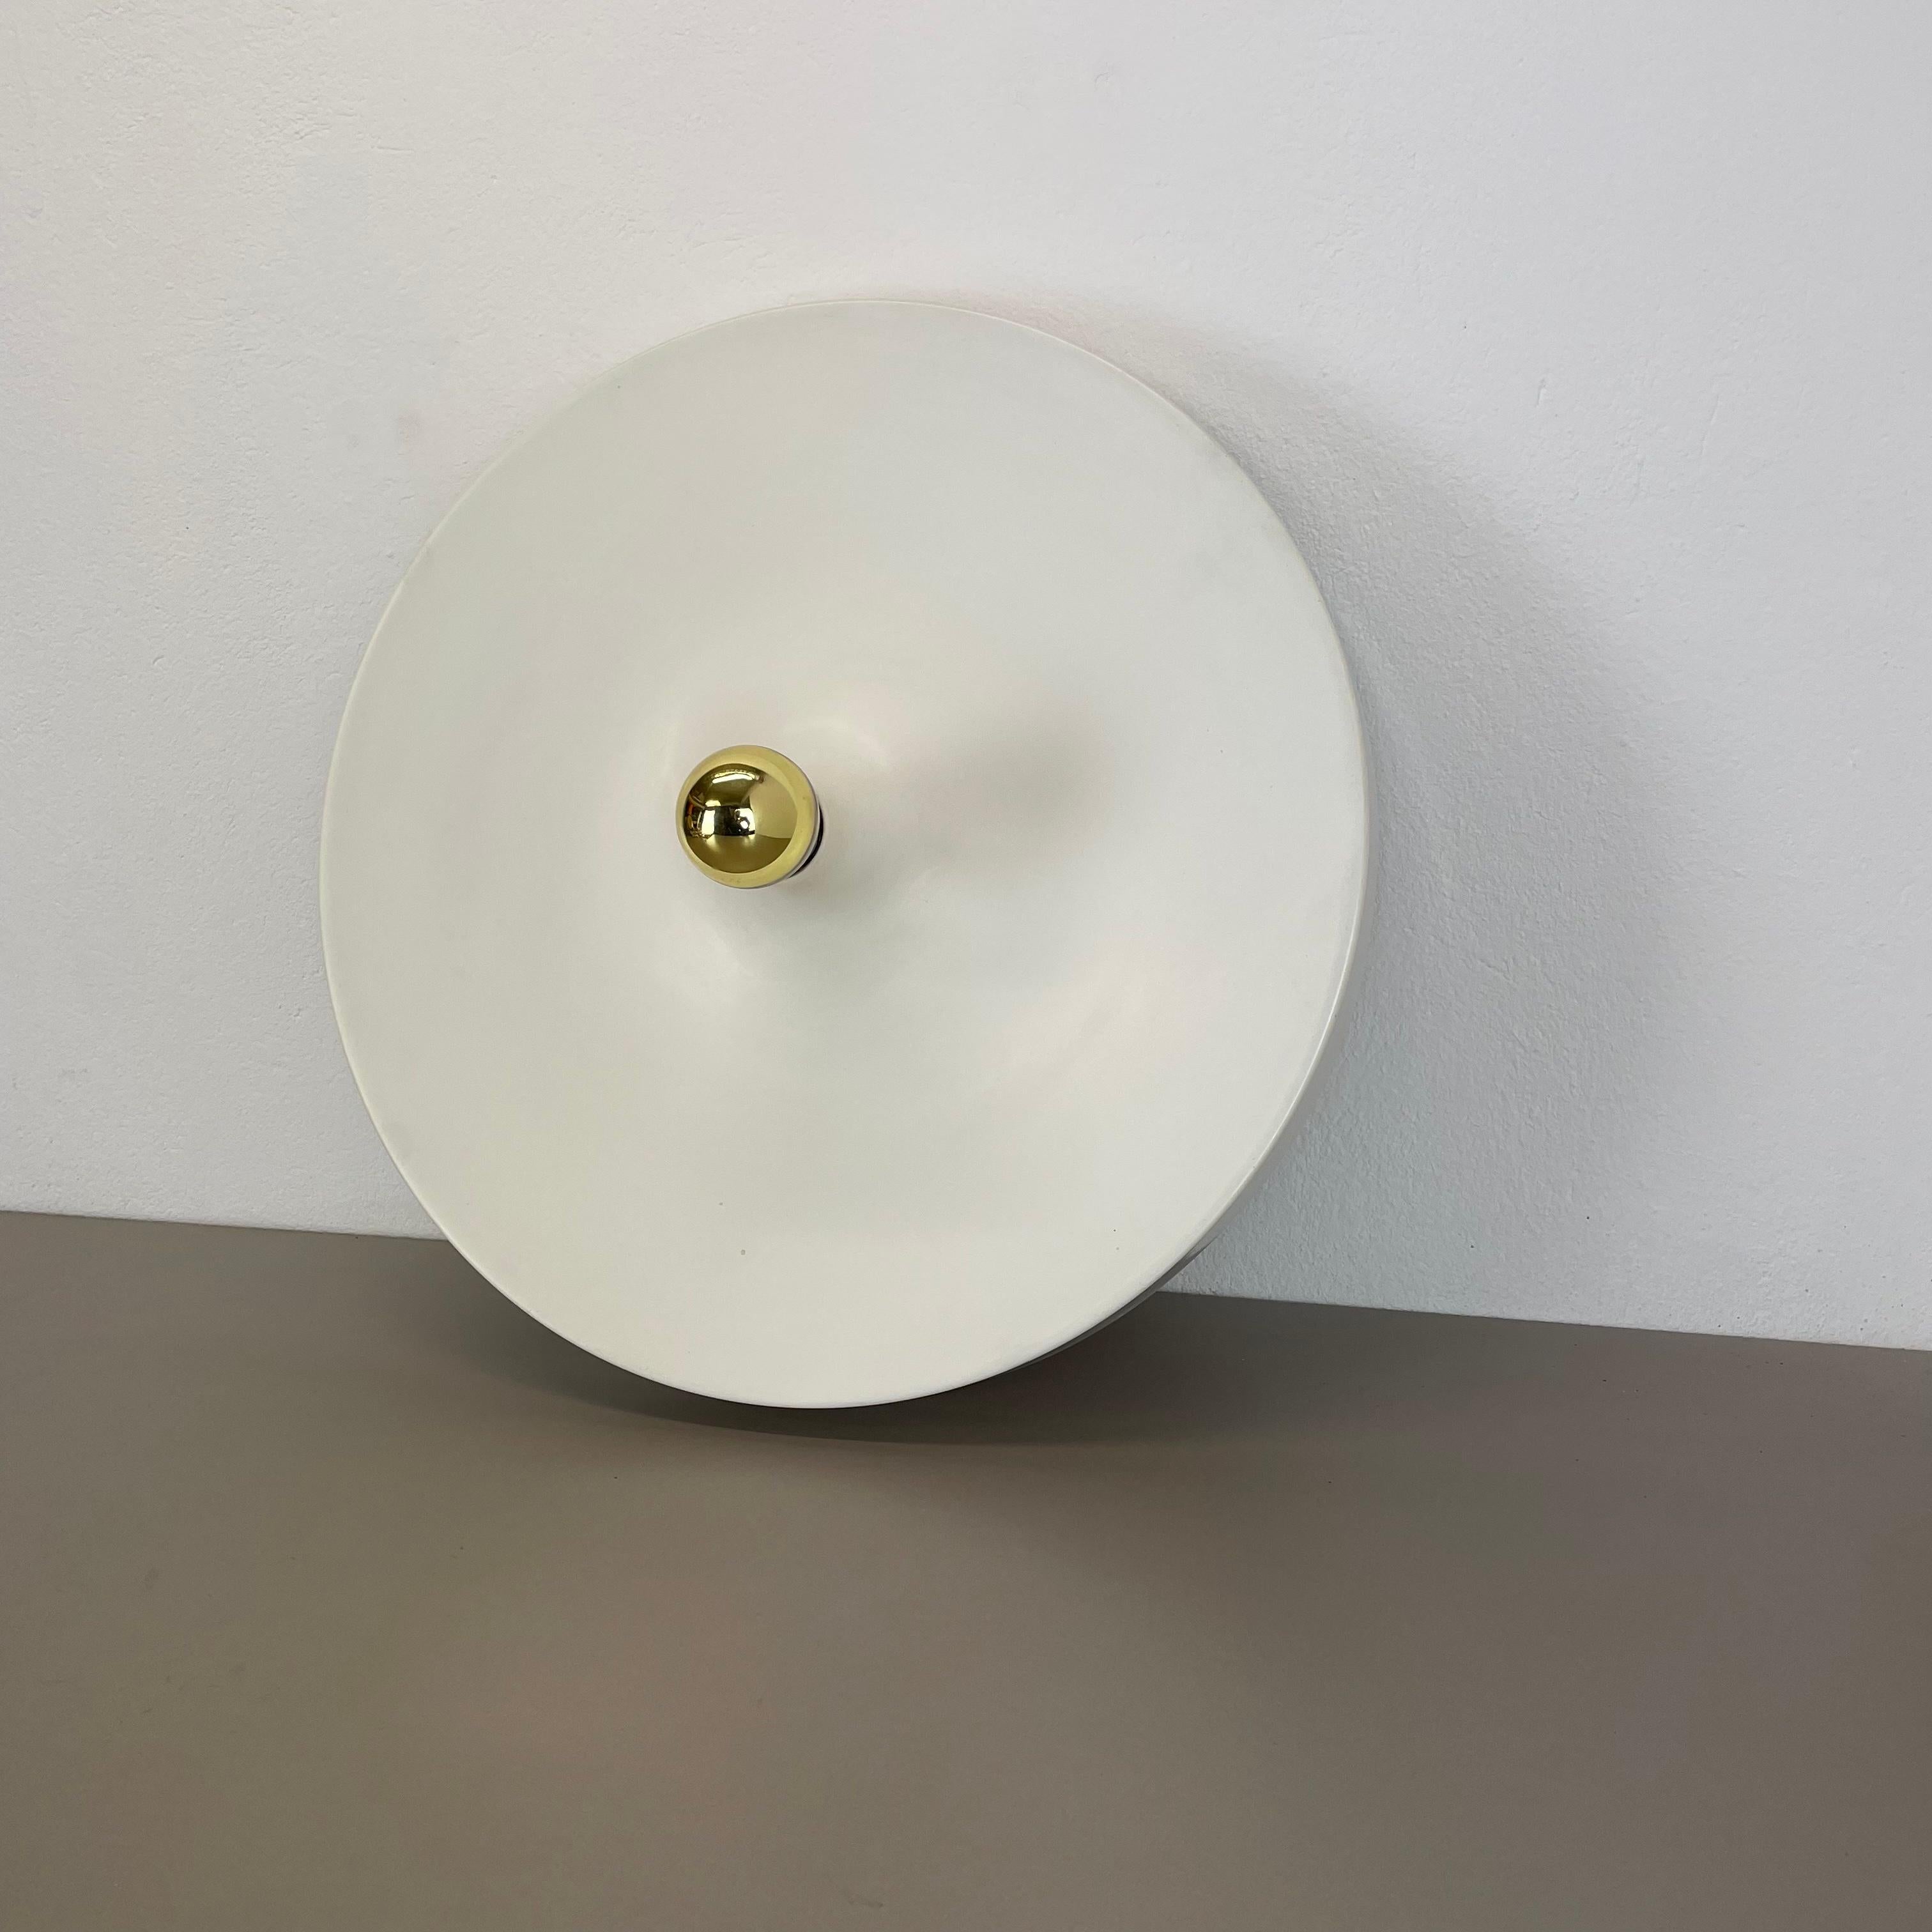 Article:

Extra-large wall light sconce


Producer:

Staff lights



Origin:

Germany



Age:

1970s



Description:

Original 1970s modernist German wall light made of solid aluminium metal. This super rare wall light was